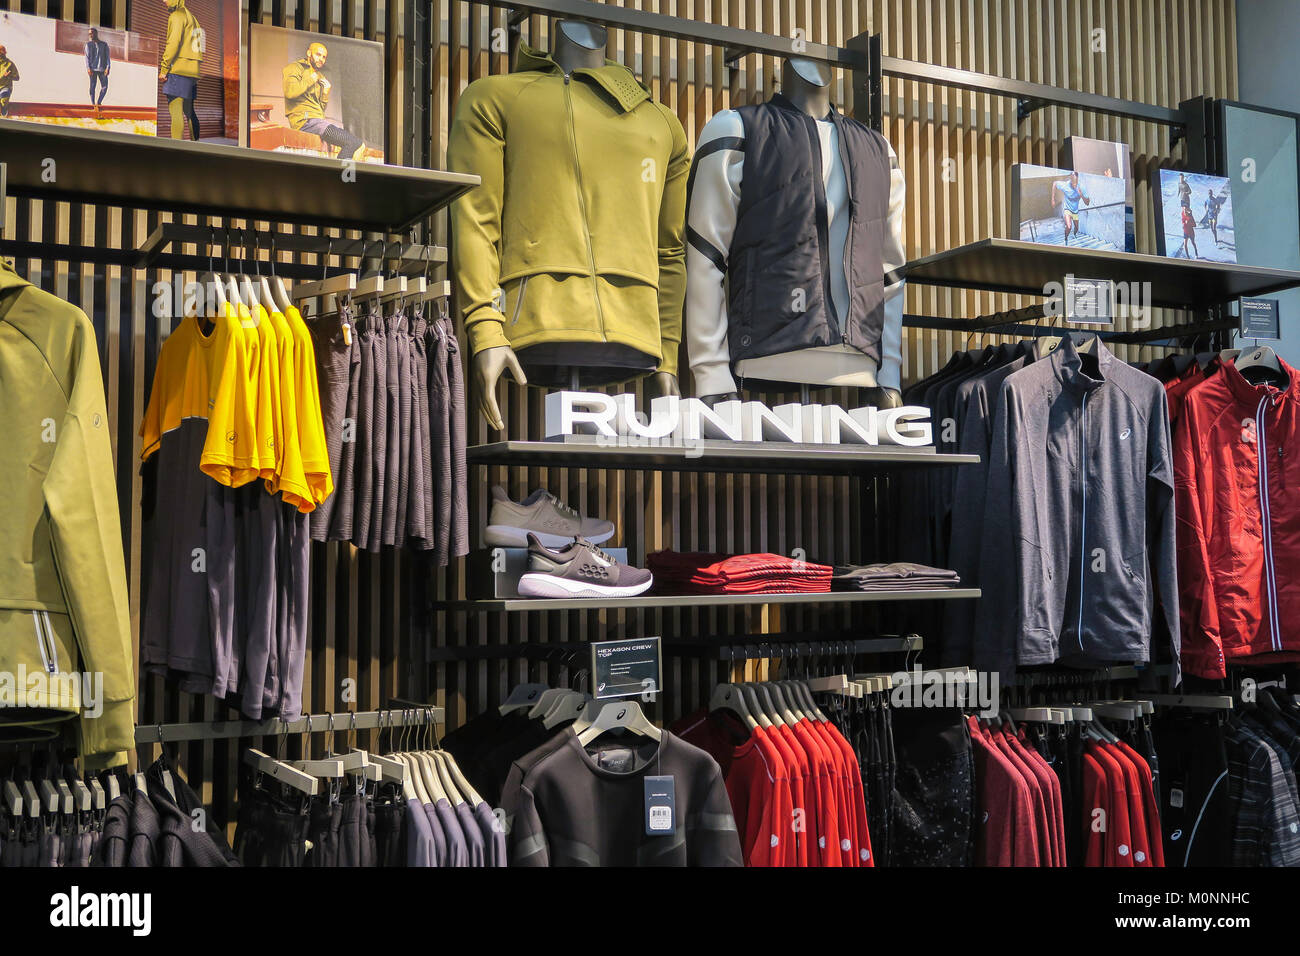 Asics Athletic Wear Store on Fifth Avenue, NYC, USA Stock Photo - Alamy